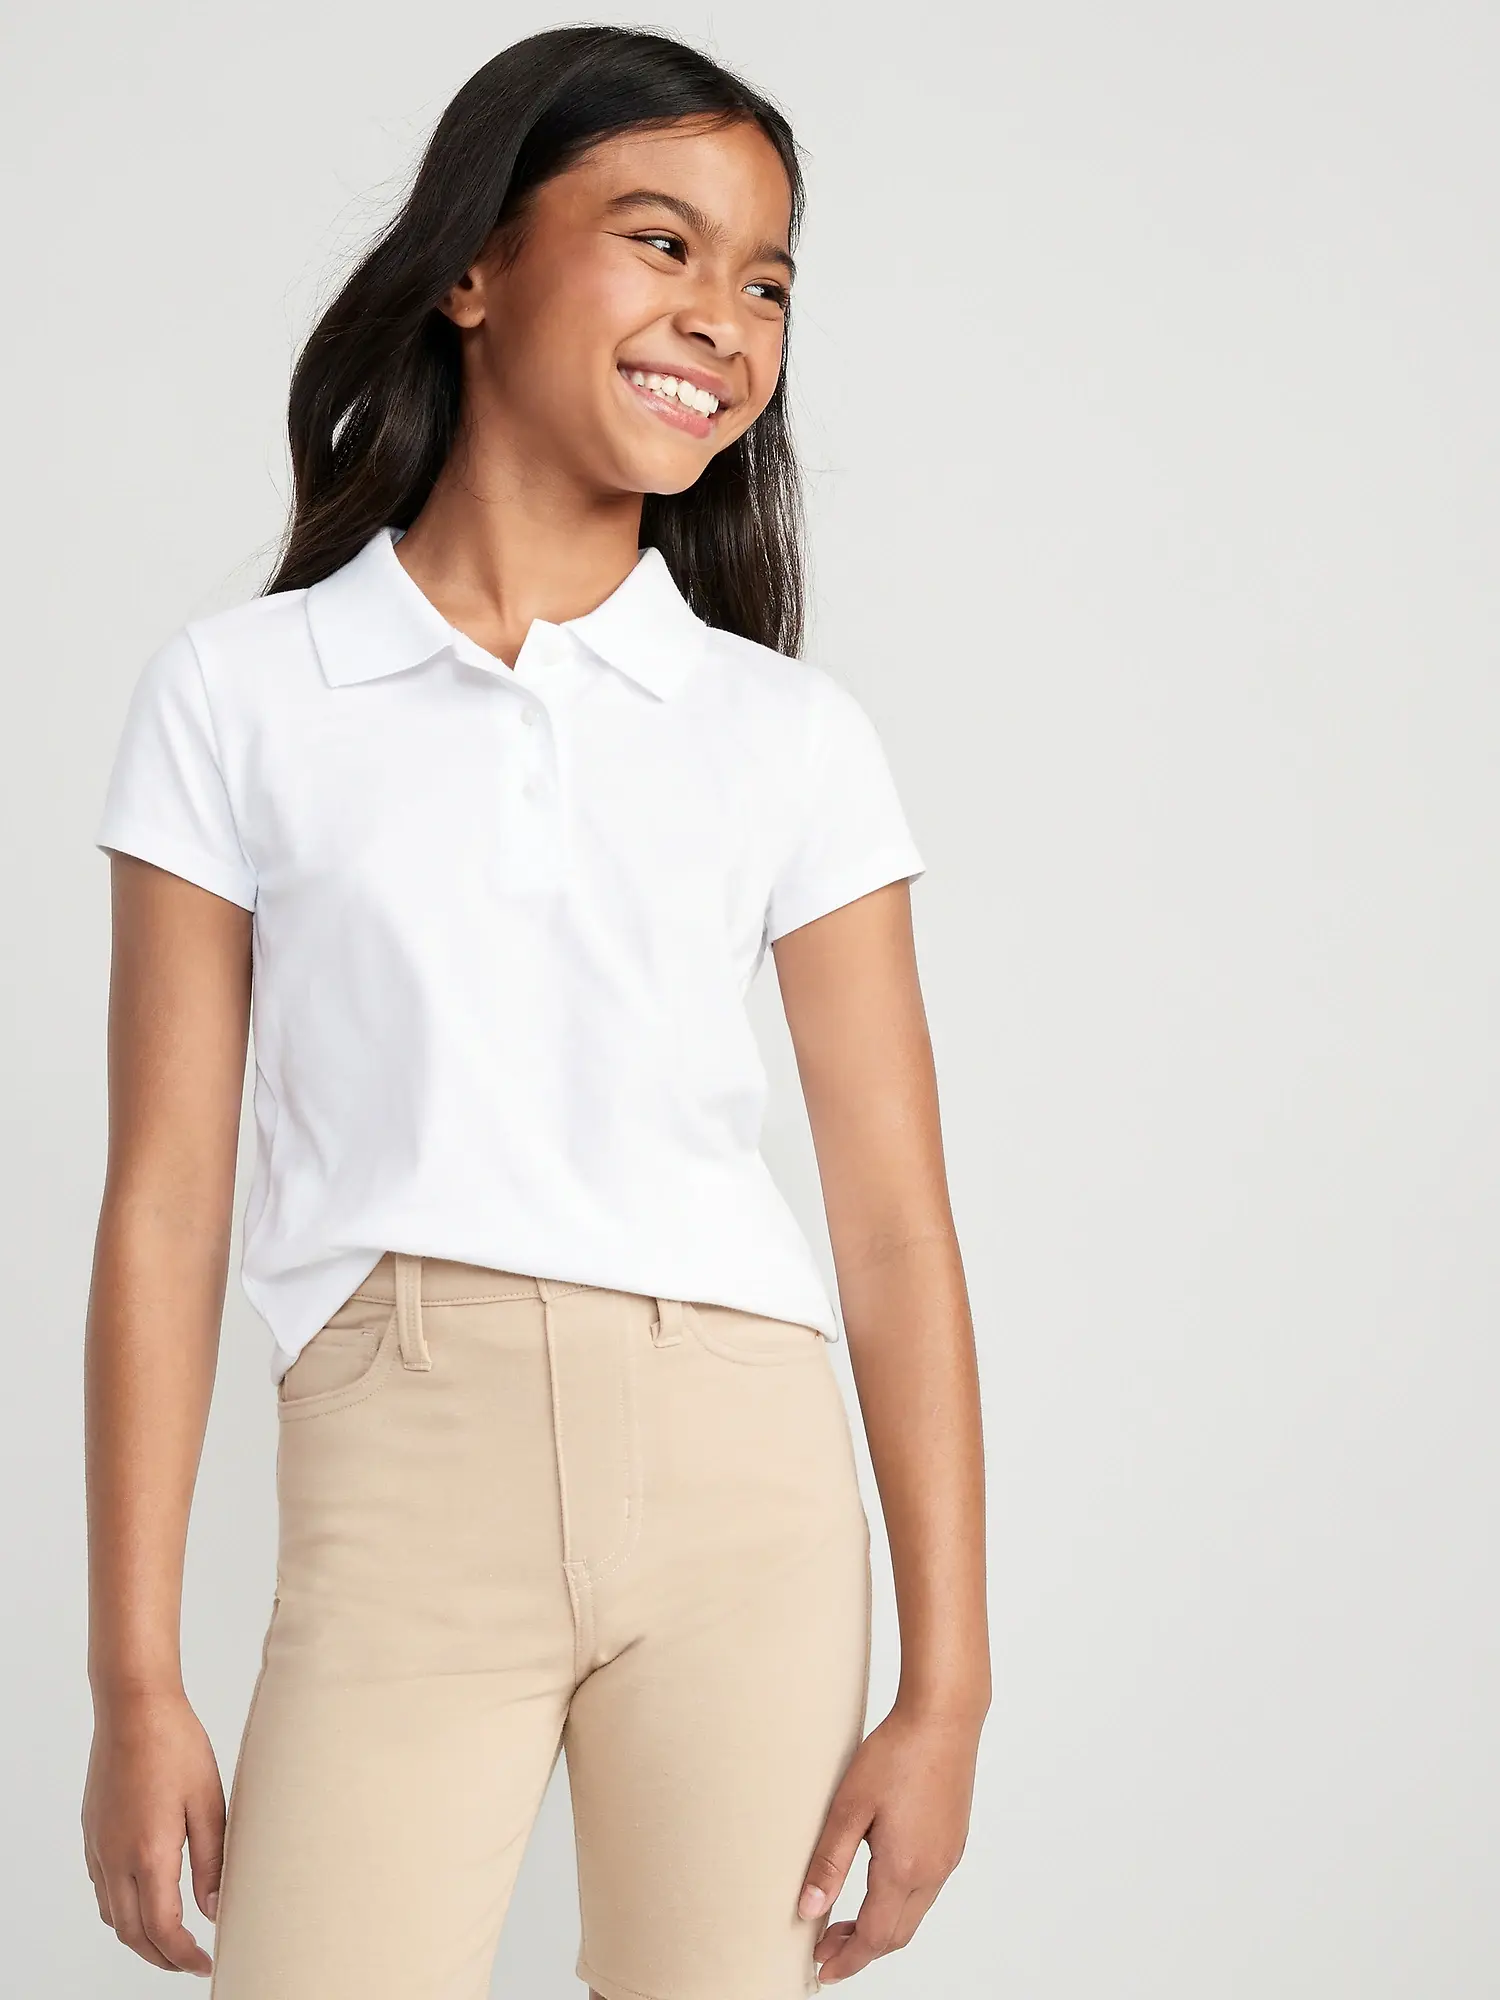 Old Navy Uniform Jersey Polo Shirt for Girls white. 1